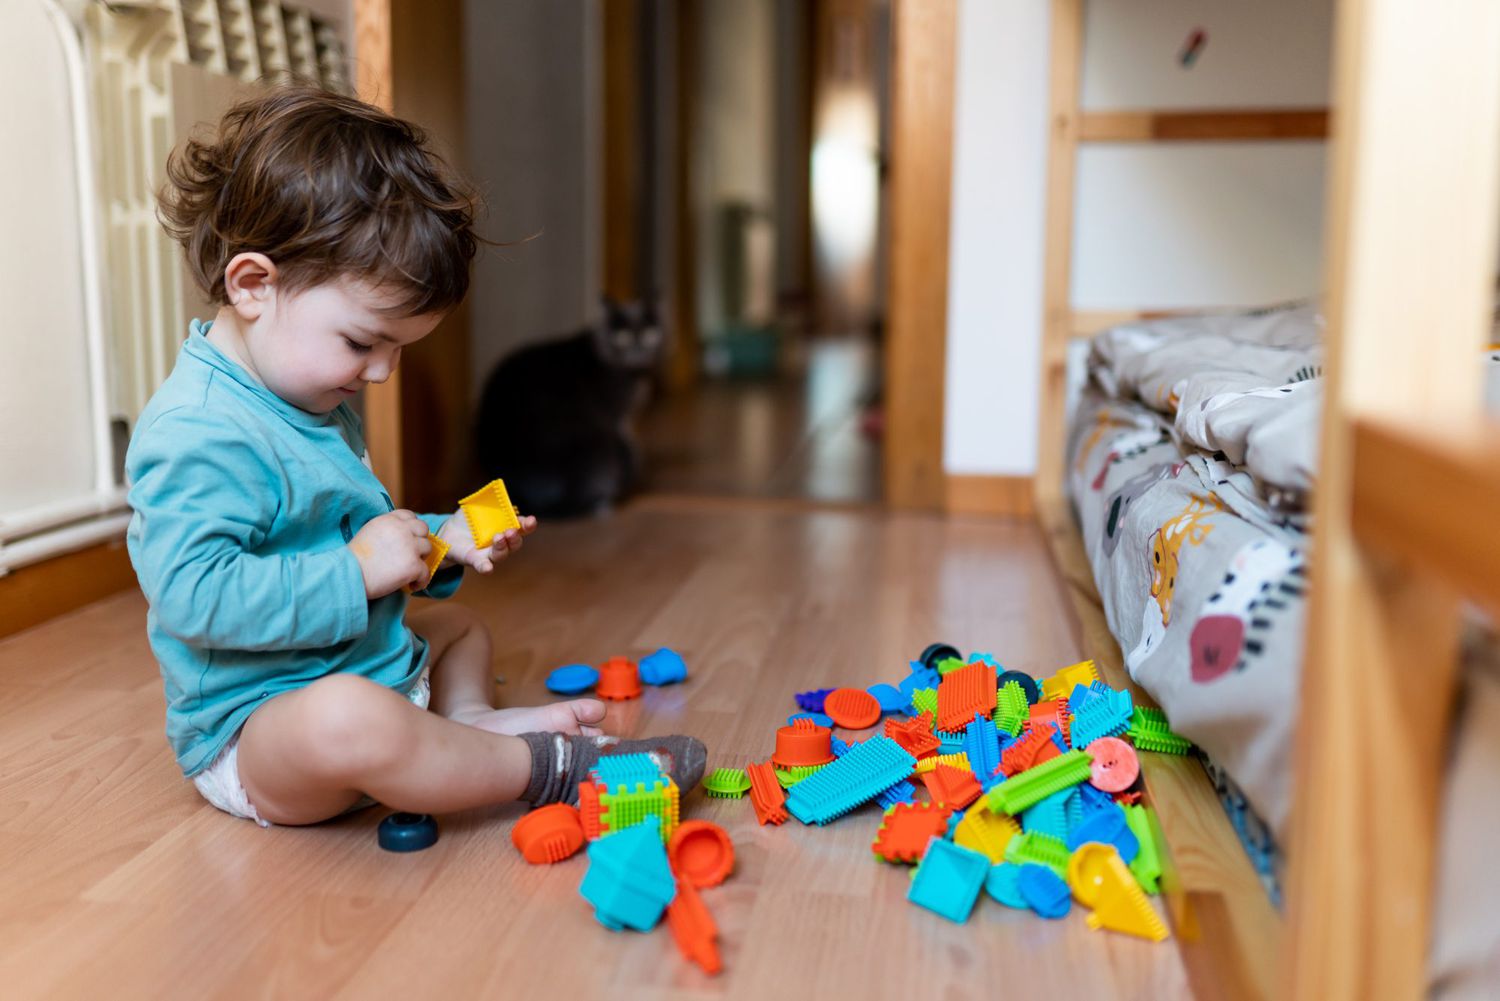 Baby playing at bedroom with colorful construction pieces sittion on the floor